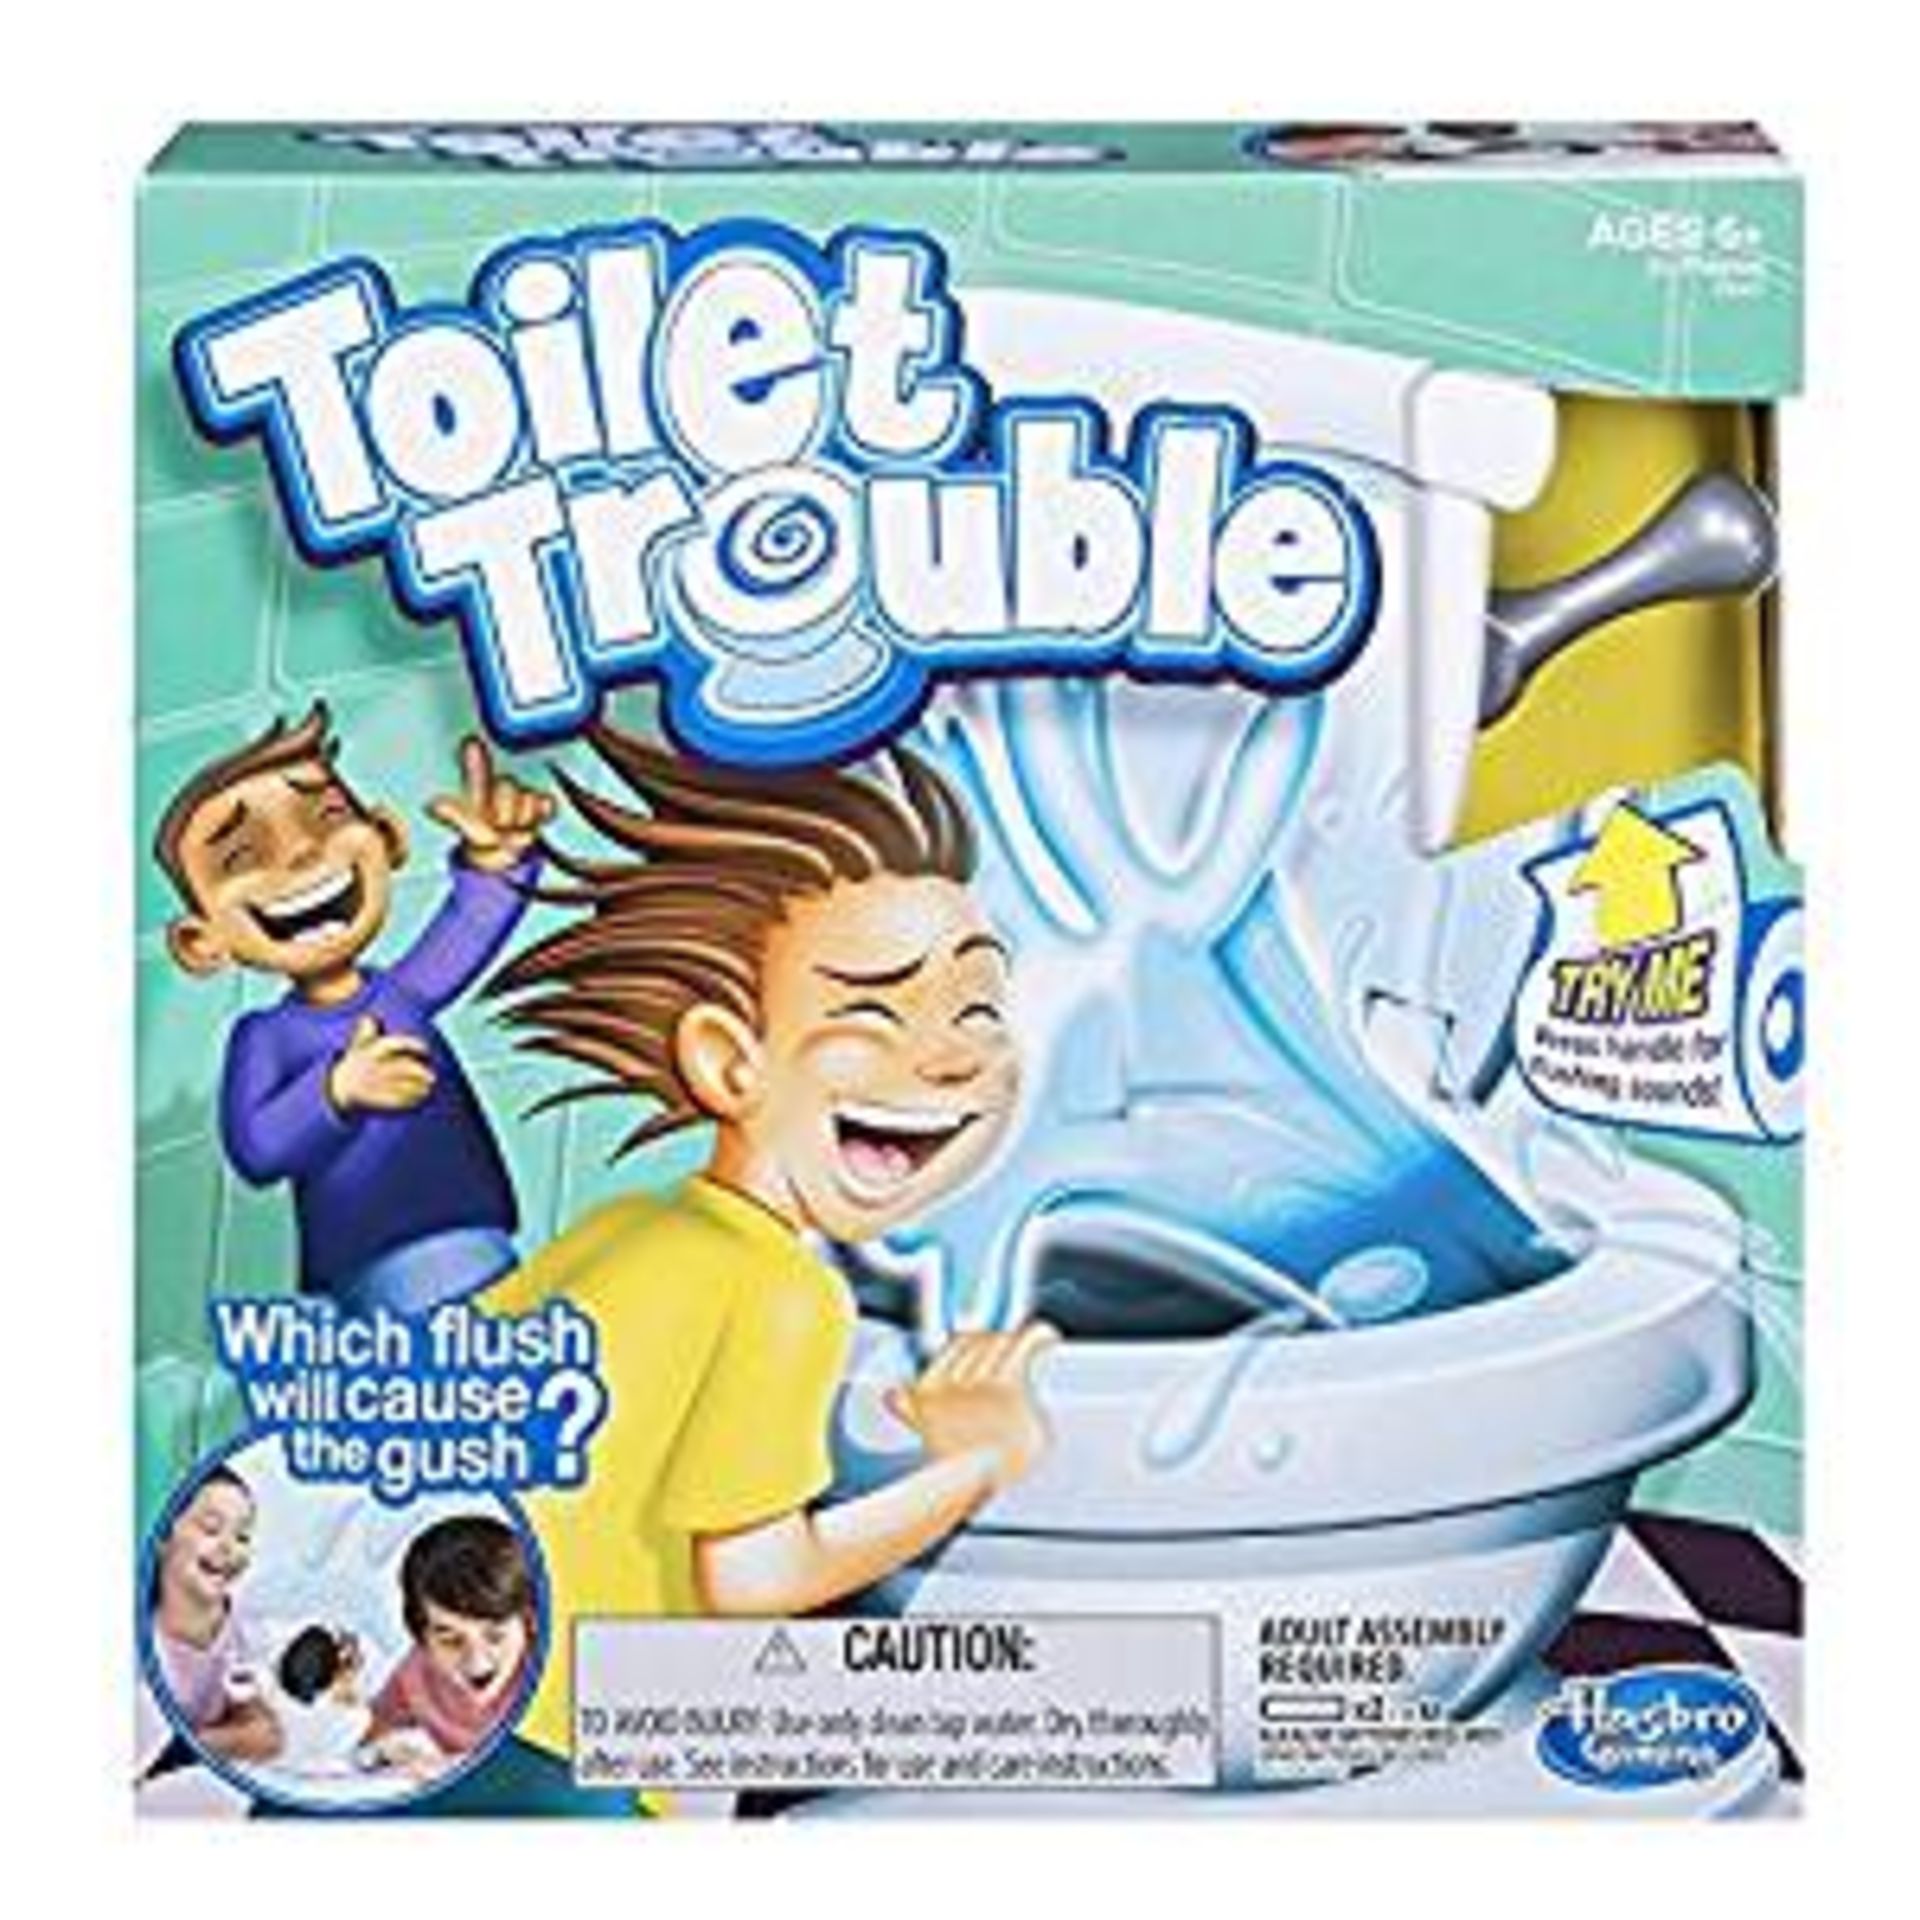 120 x Toilet Trouble Hilarious Interactive Game Kids/Families Flush Sound Effects | RRP £ 2088